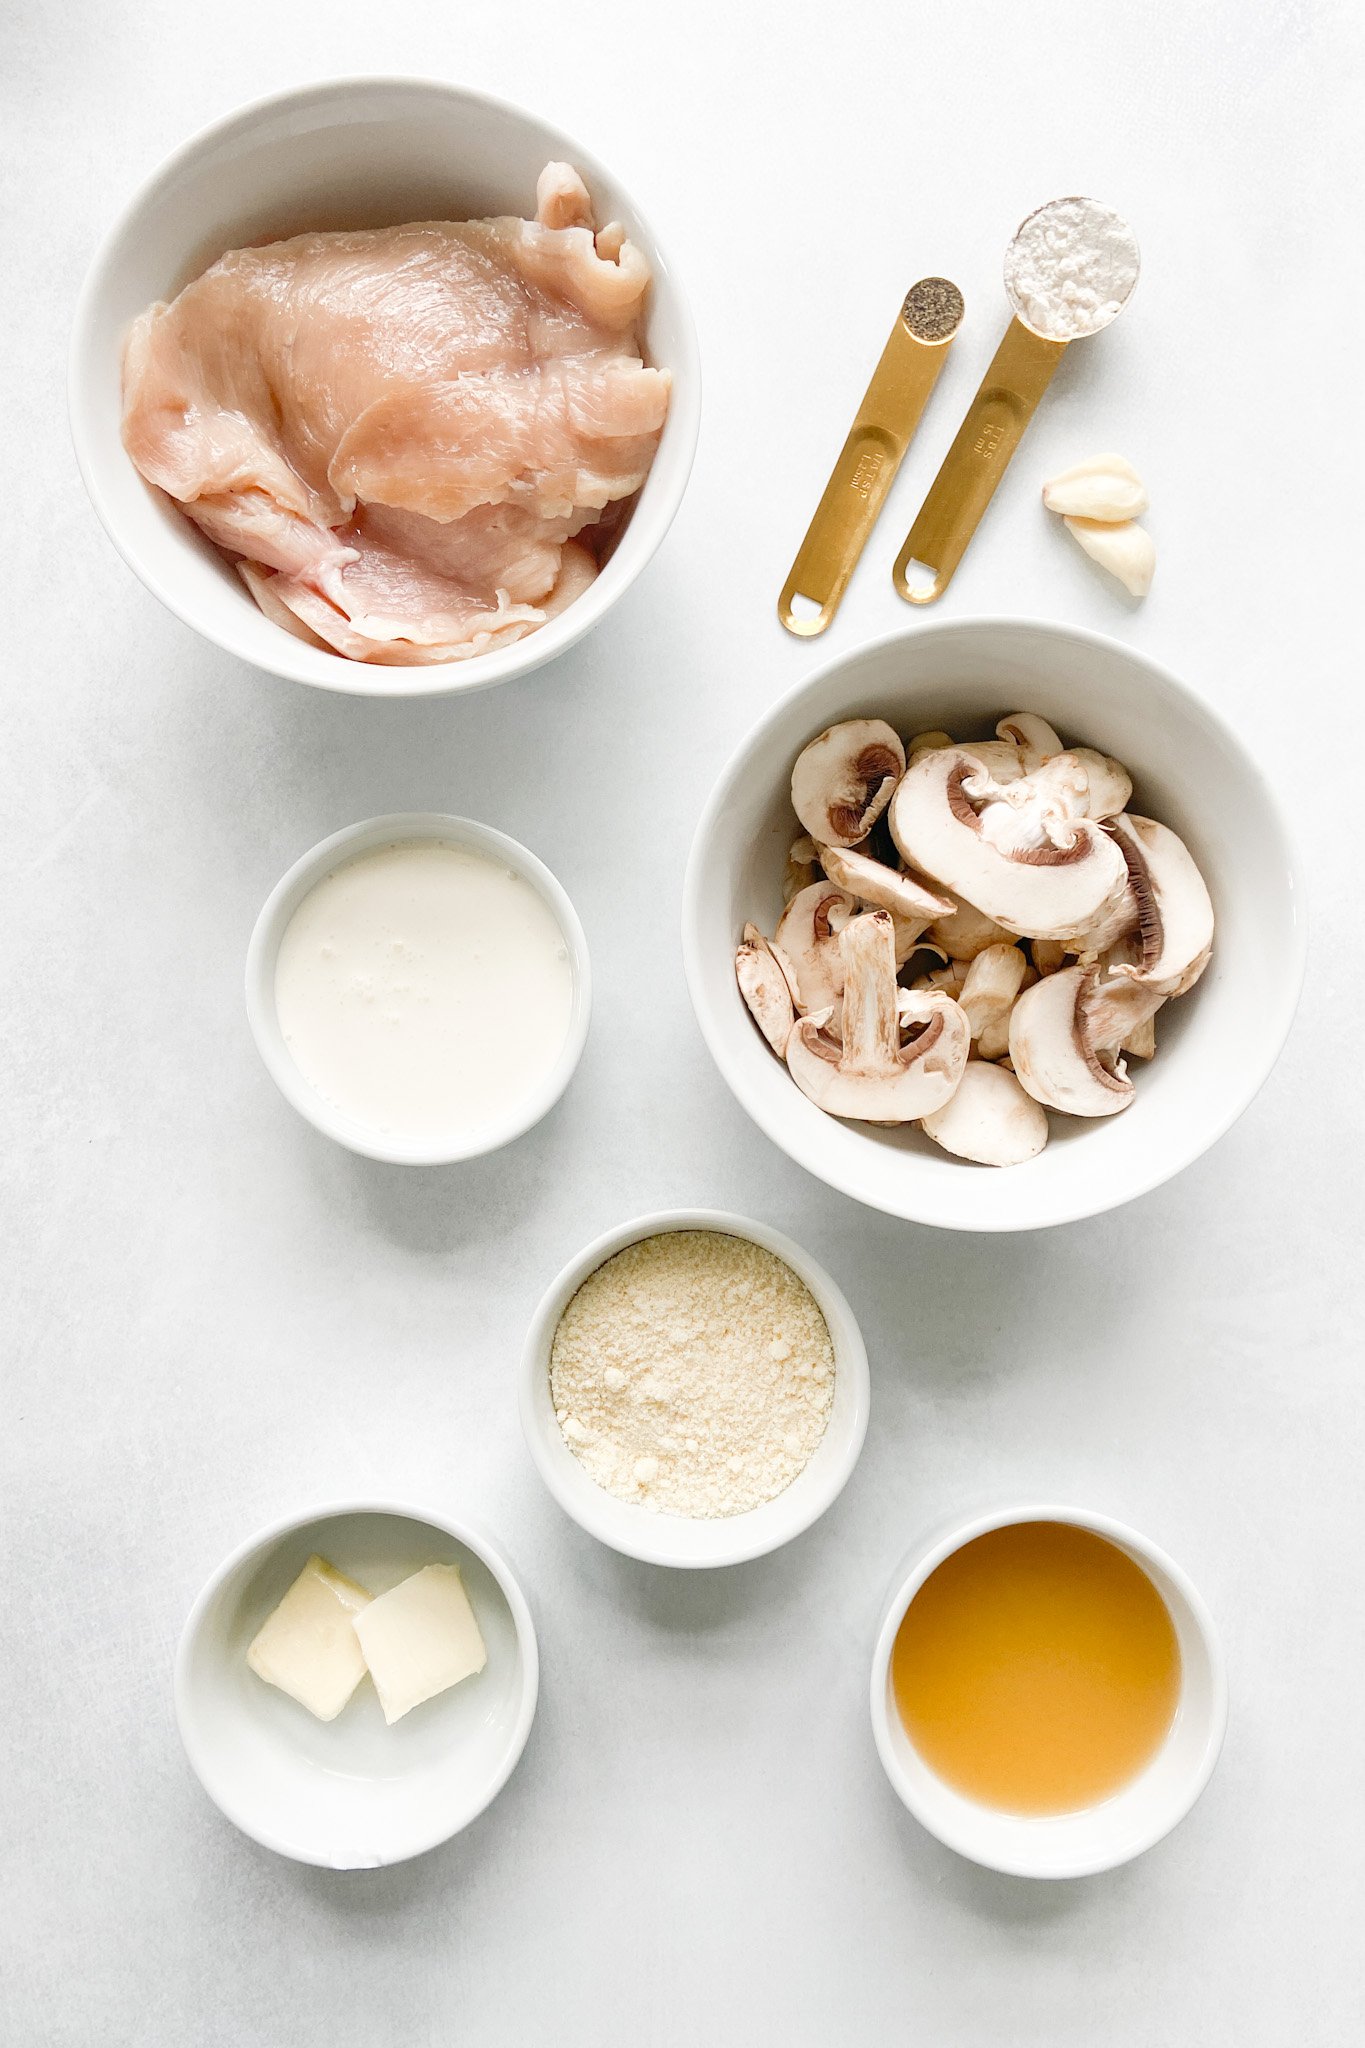 Ingredients to make creamy mushroom chicken. See recipe card for detailed ingredient quantities.